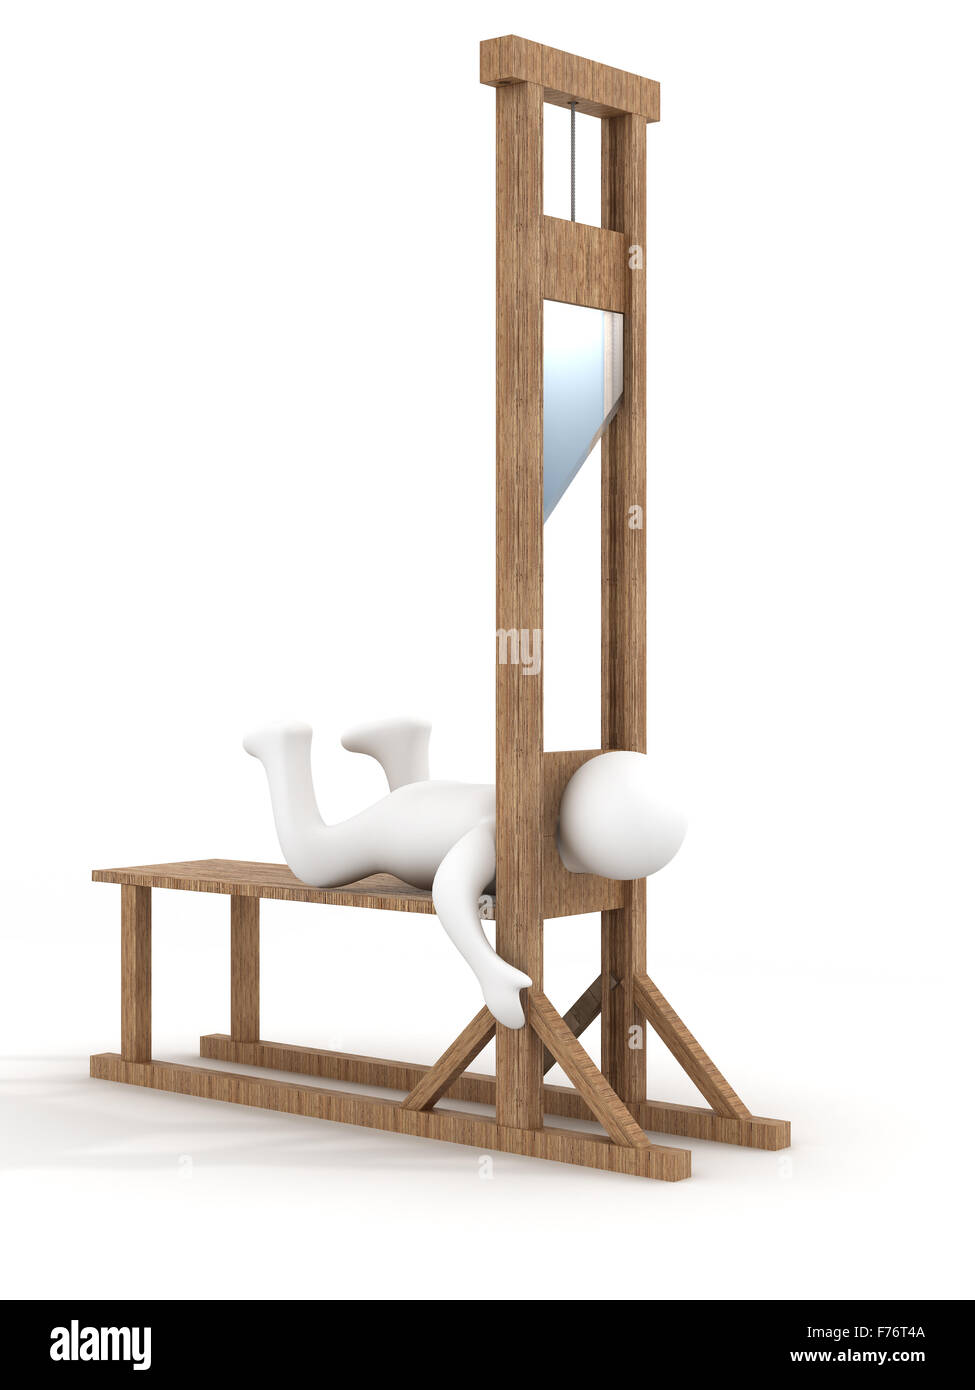 Guillotine on a white background. 3D image. Stock Photo